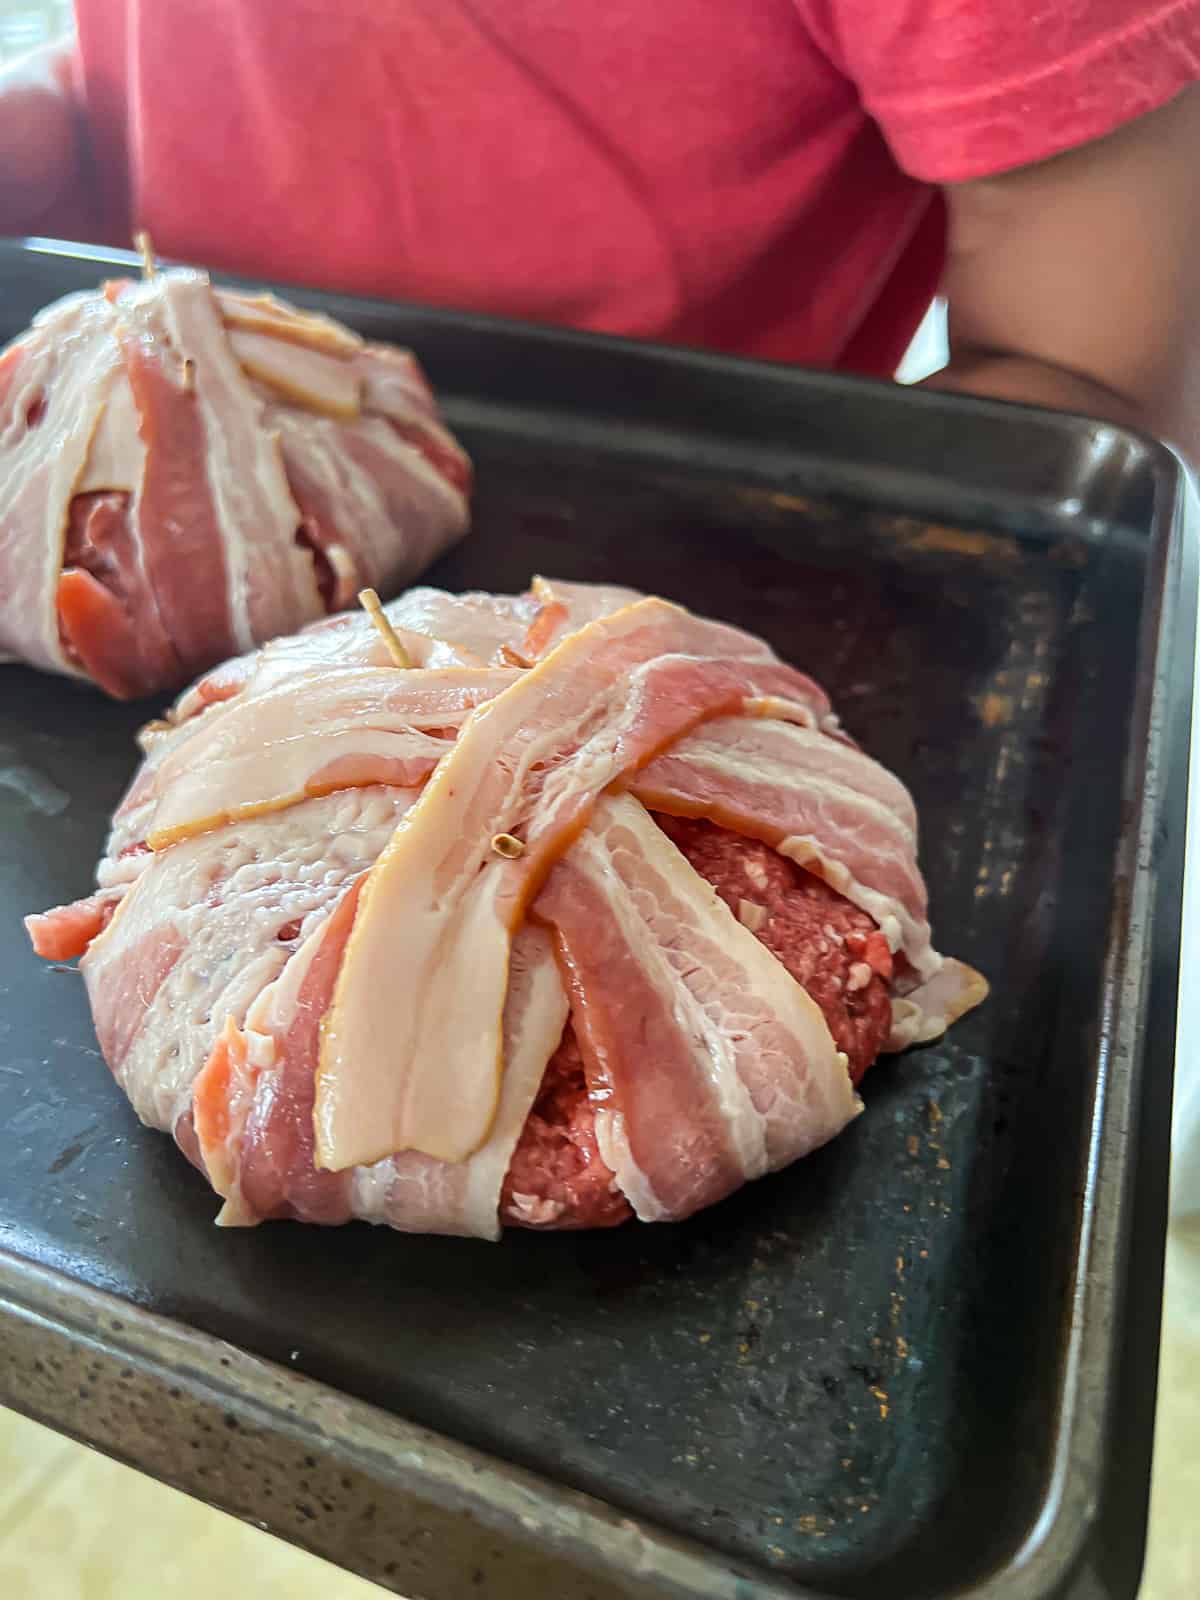 Raw Bacon Wrapped Around Burger Patties On A Baking Sheet